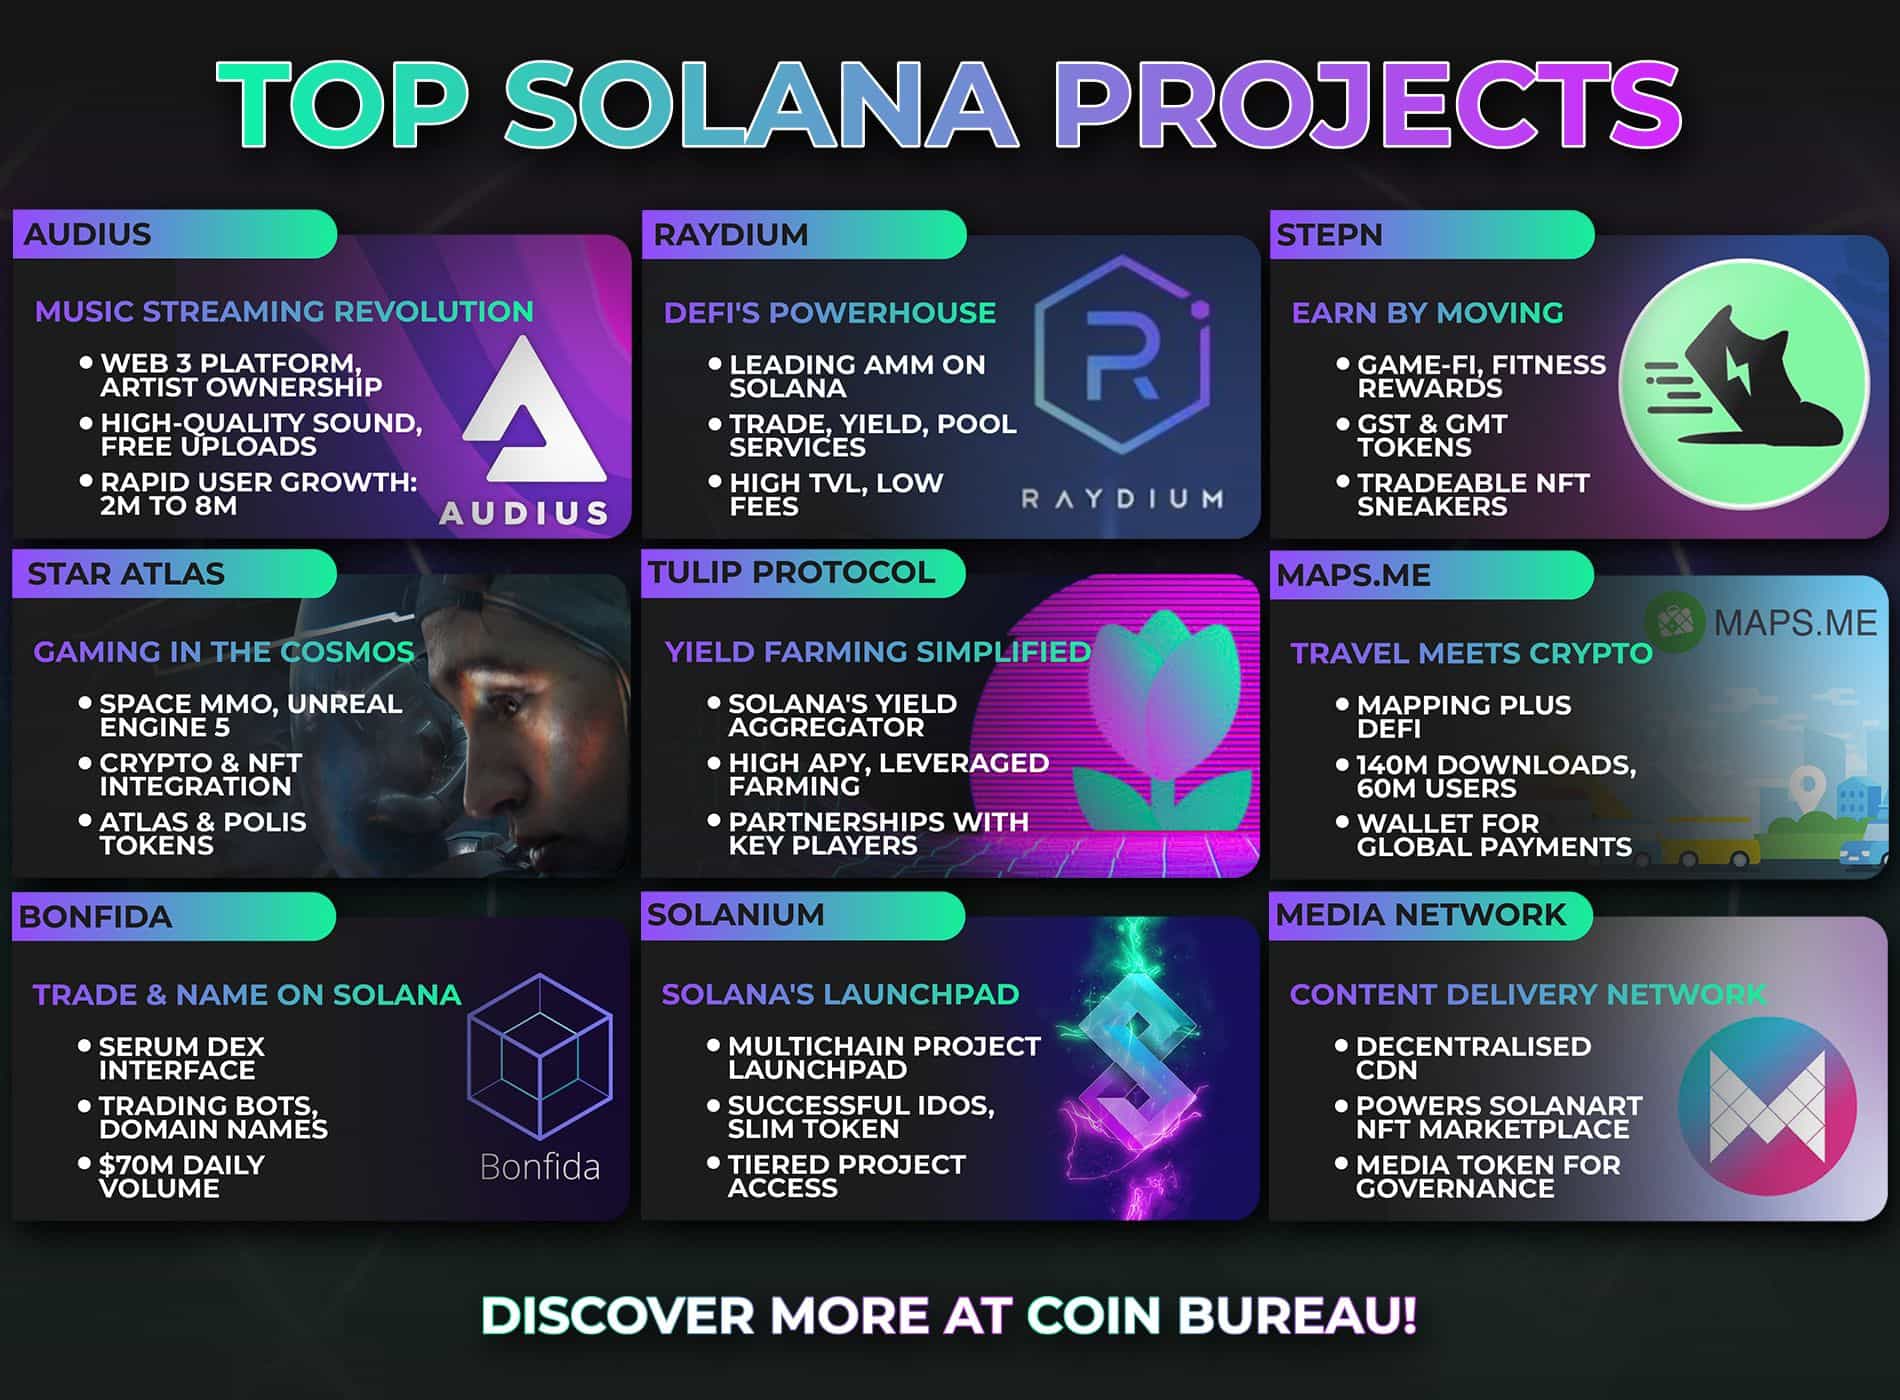 Top-Solana-Projects (2).jpg